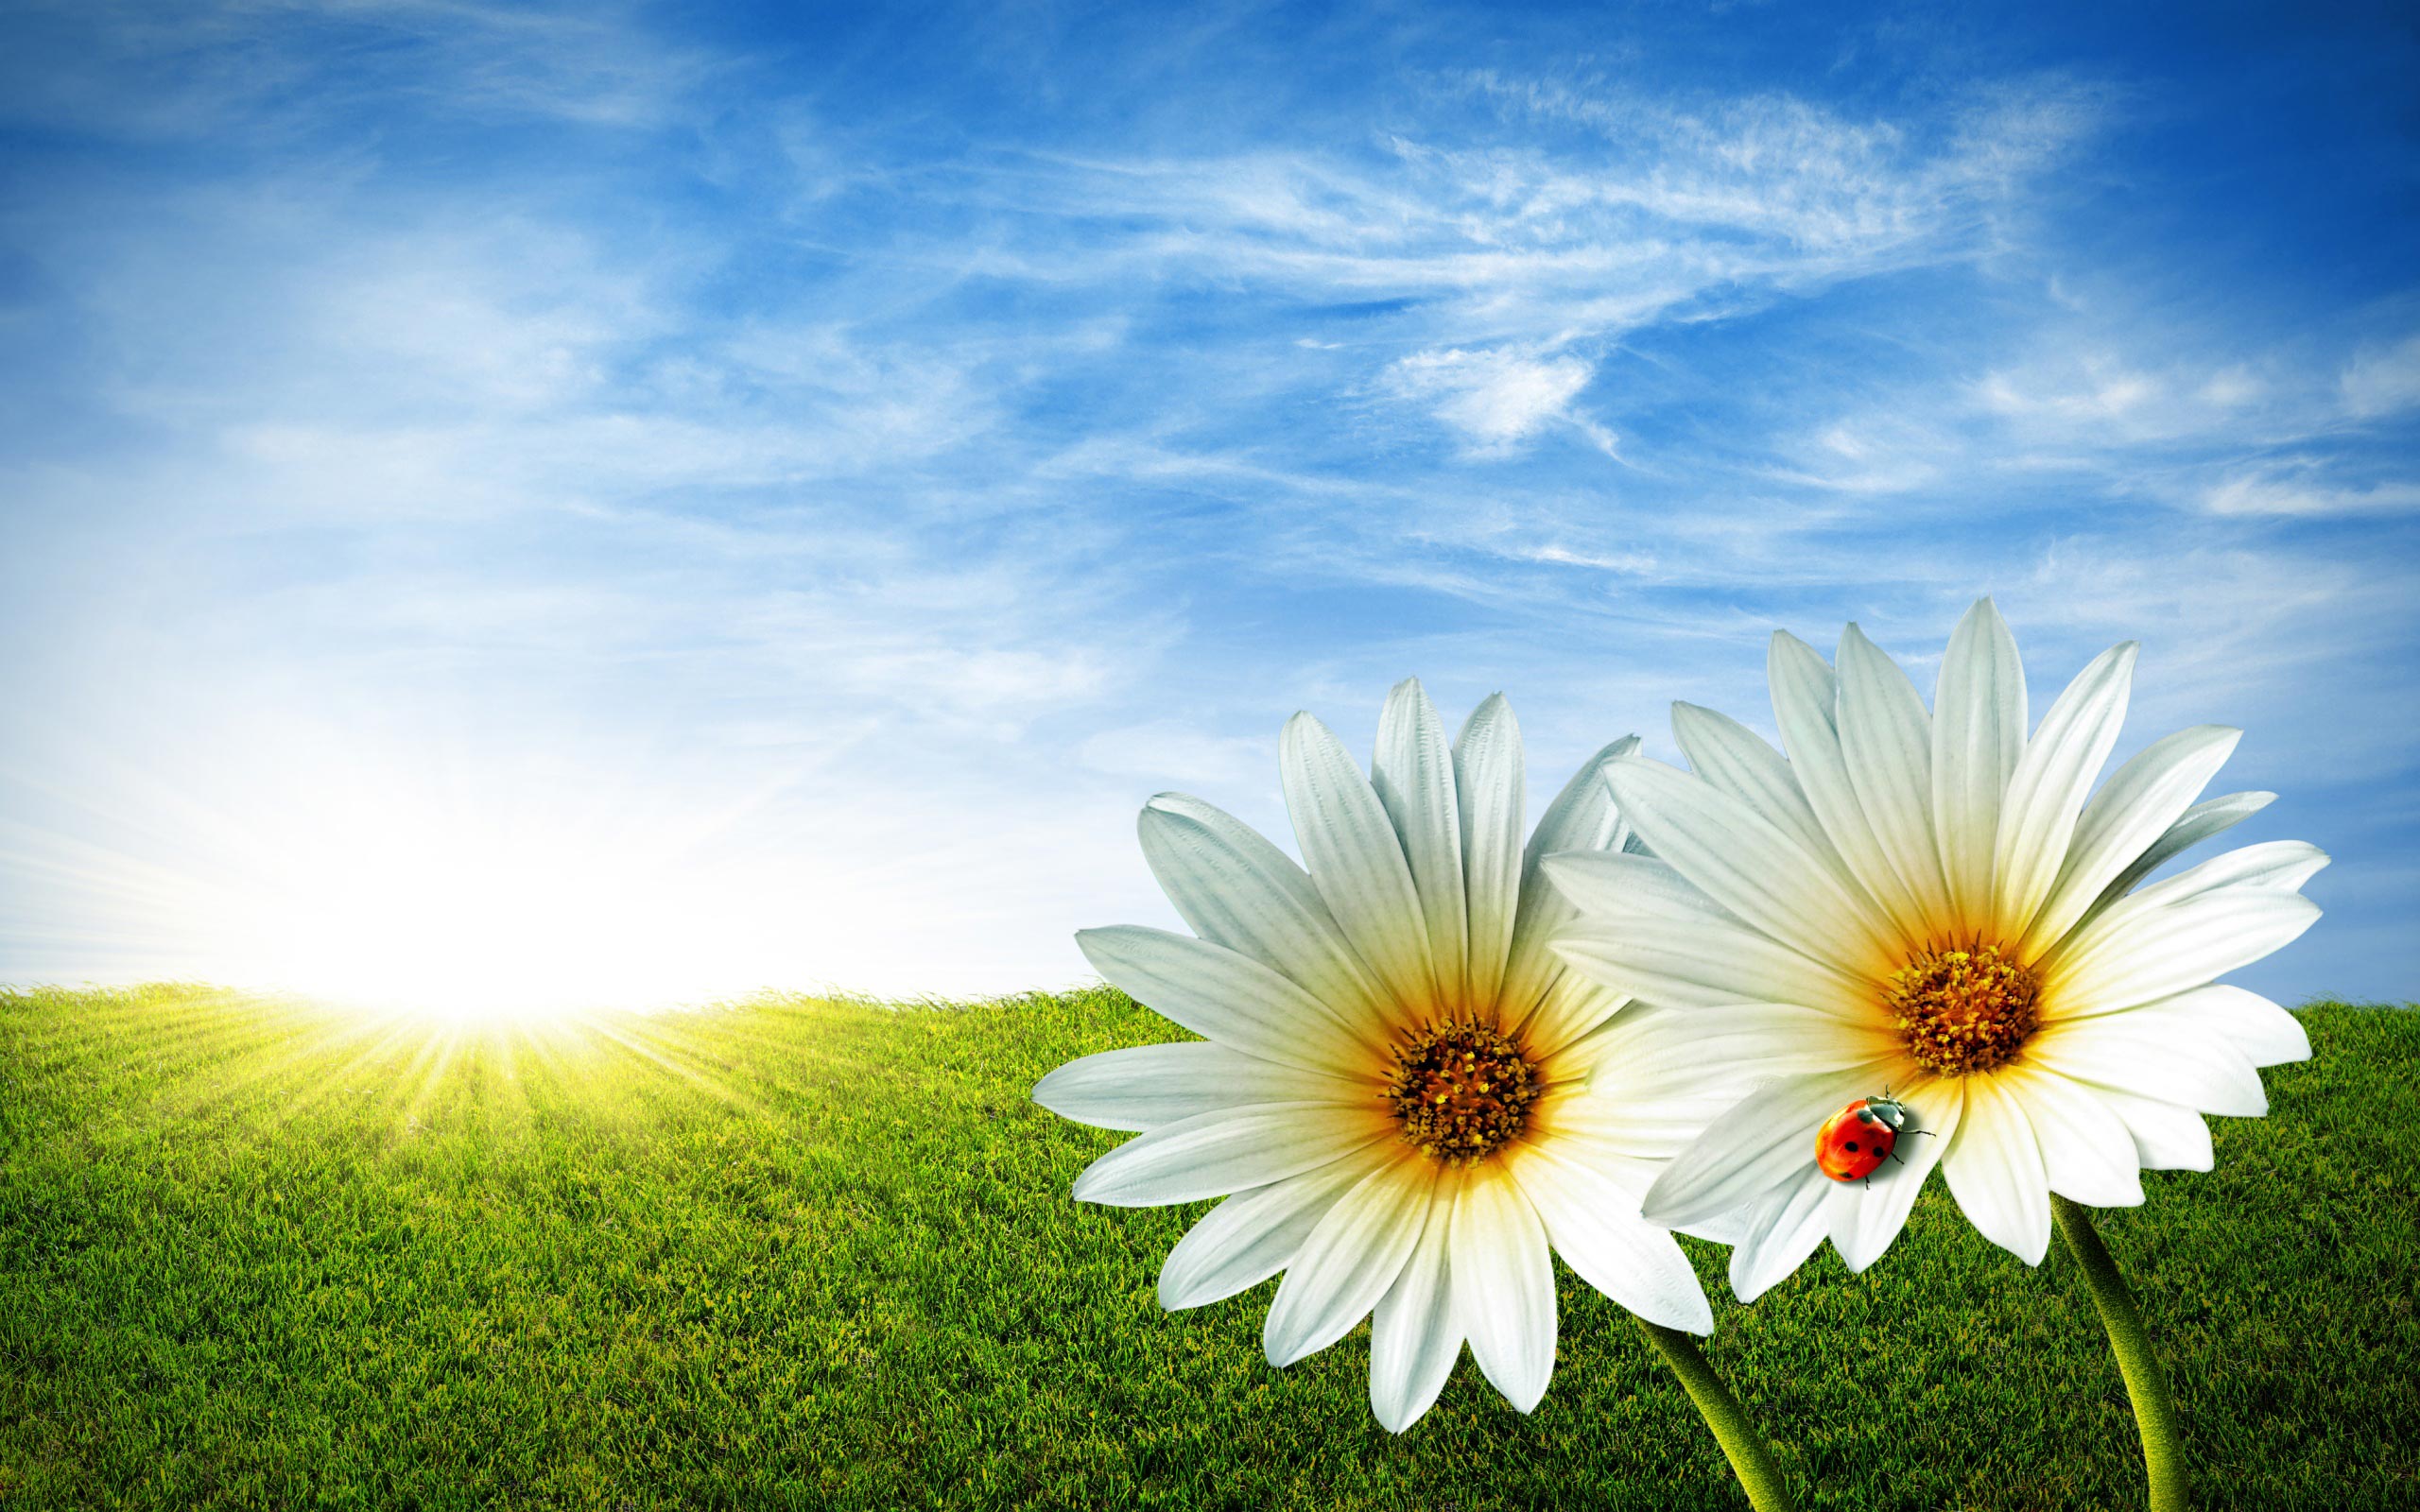  spring wallpapers category of free hd wallpapers spring screensavers